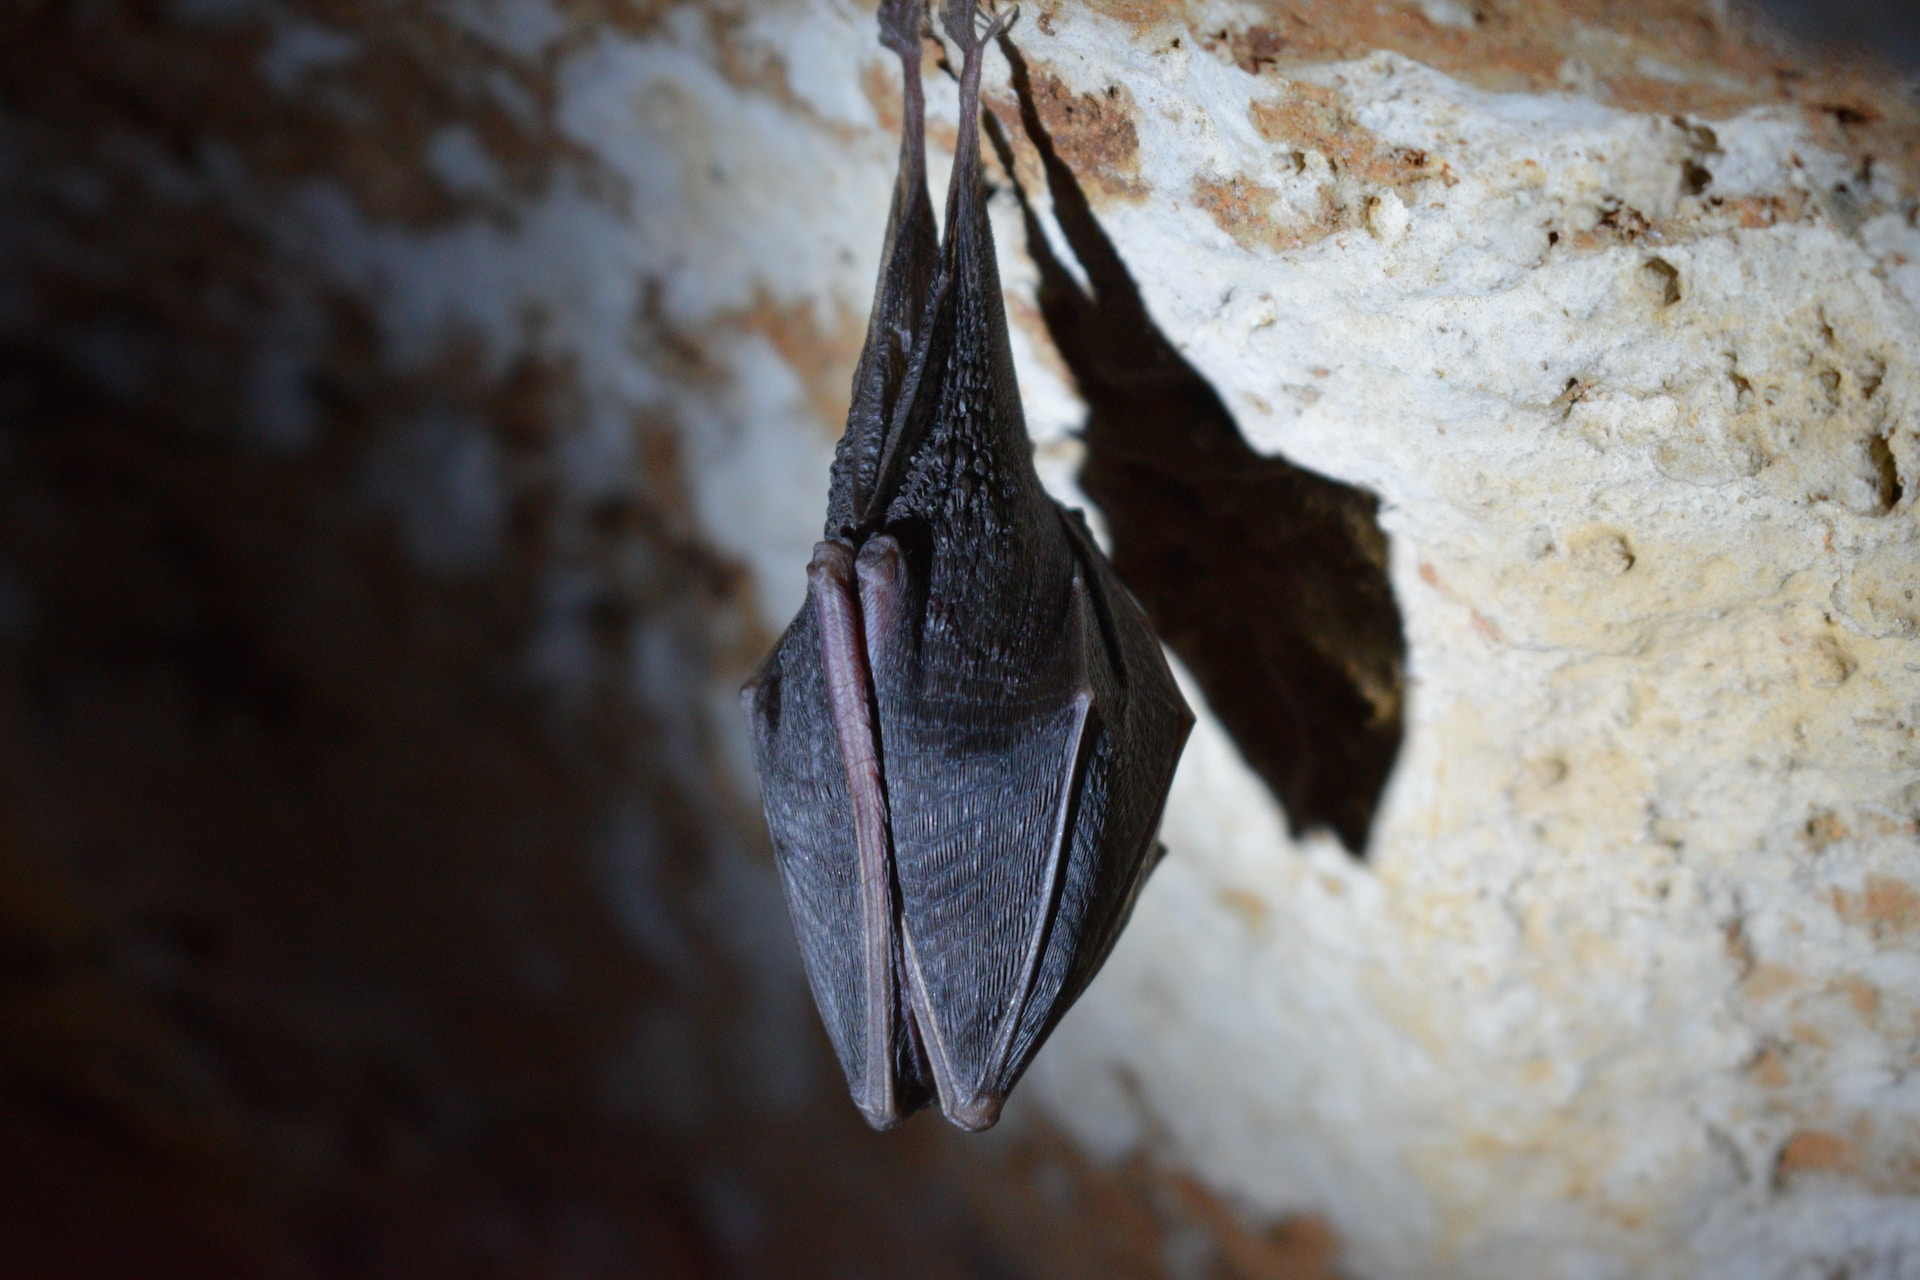 A bat closed up upside down in a residential property.